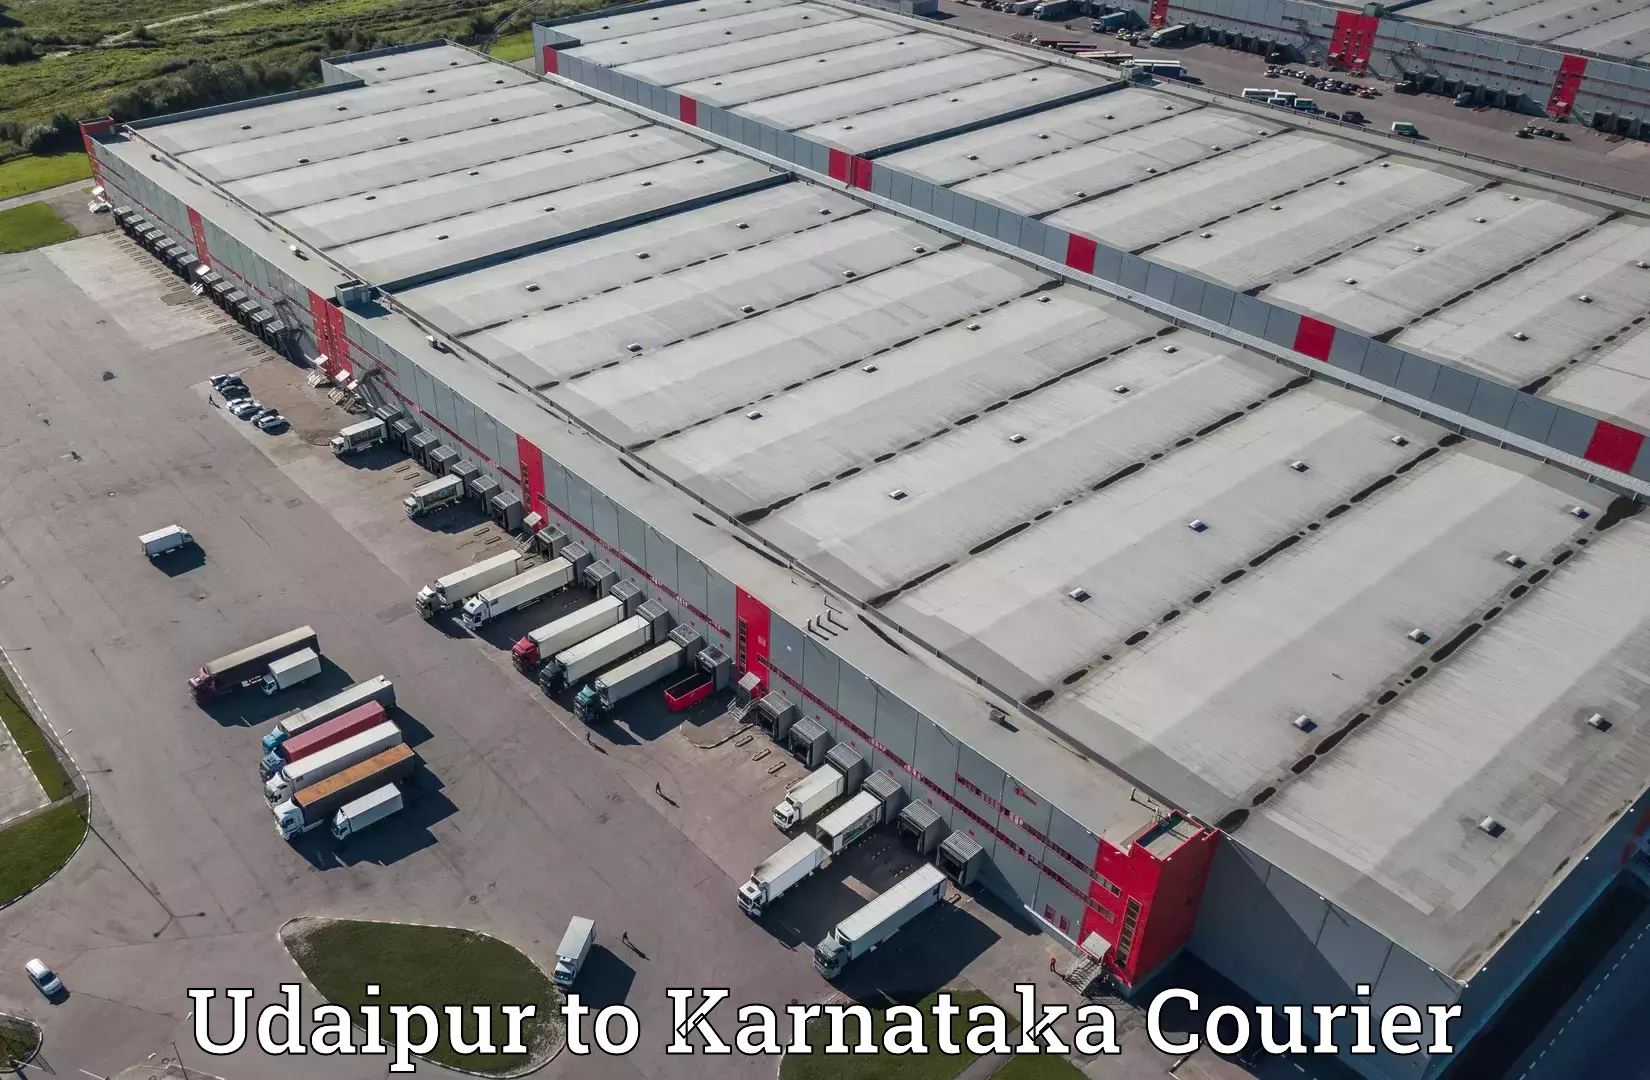 Quality courier partnerships Udaipur to Hagaribommanahalli